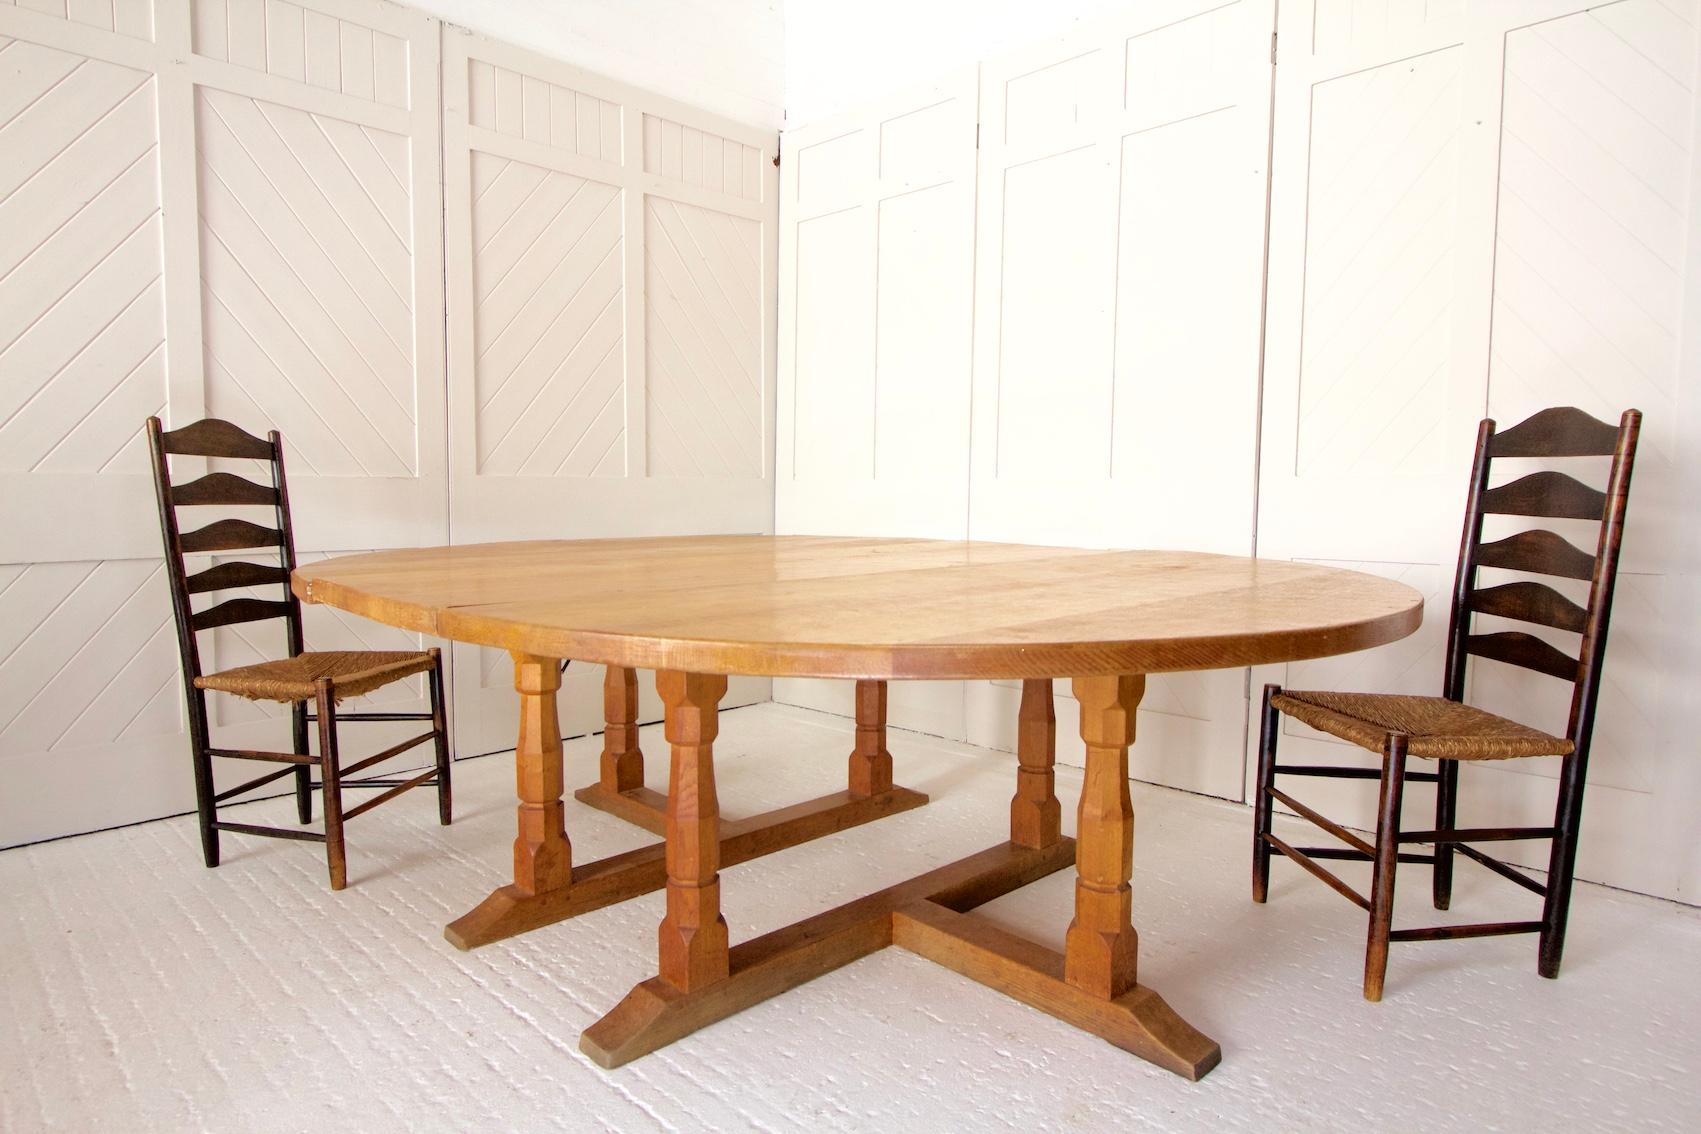 An azed oak circular extending dining table with 6 legs and a separate extension leaf to seat up to 12 people.

This table was designed by Wilf Hutchinson and his signature ‘squirrel’ has been carved on the leg. Hutchinson trained under Robert